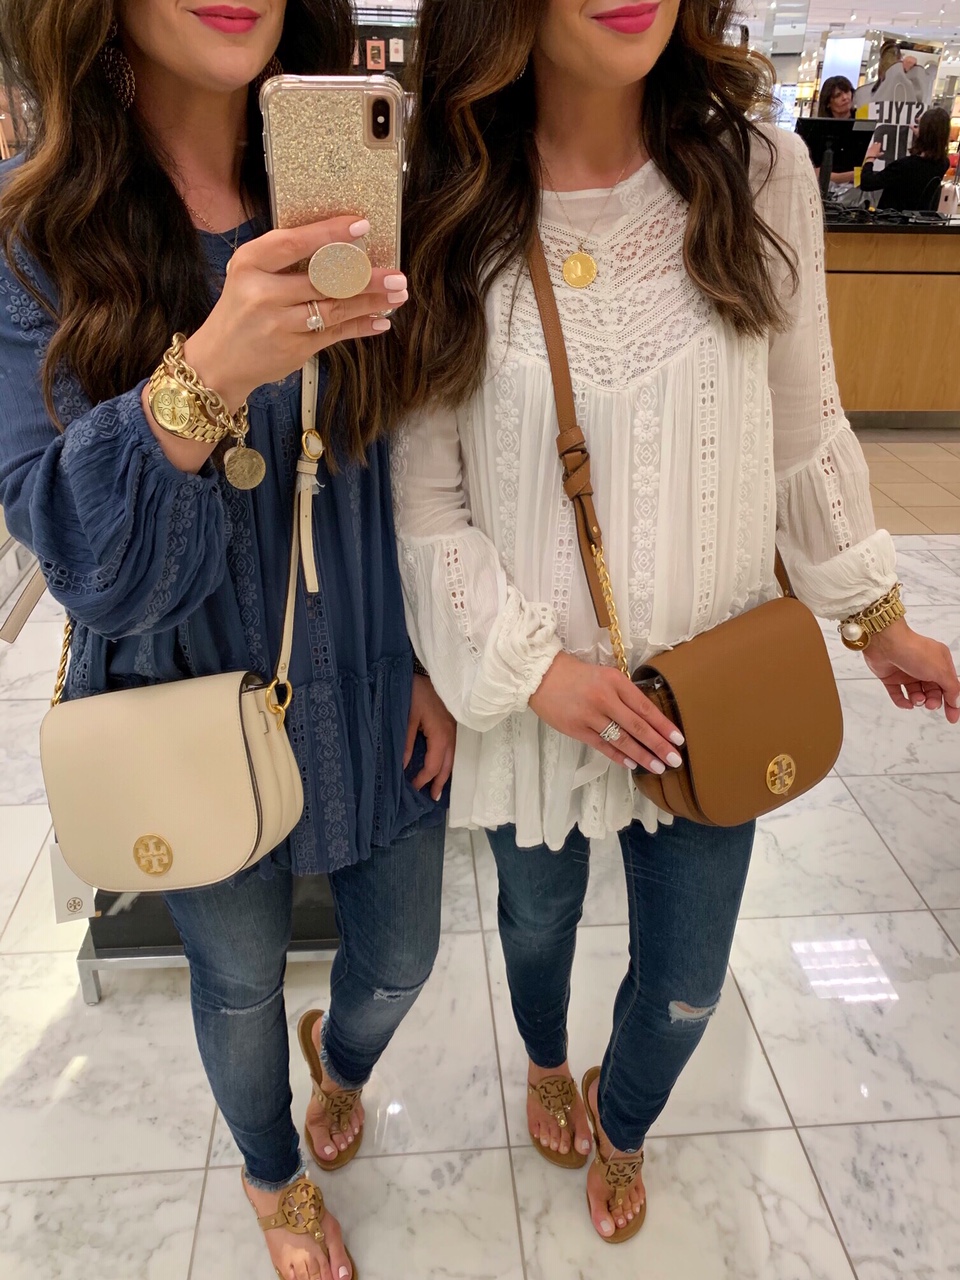 Nordstrom New Markdowns! Tory Burch & More! - The Double Take Girls